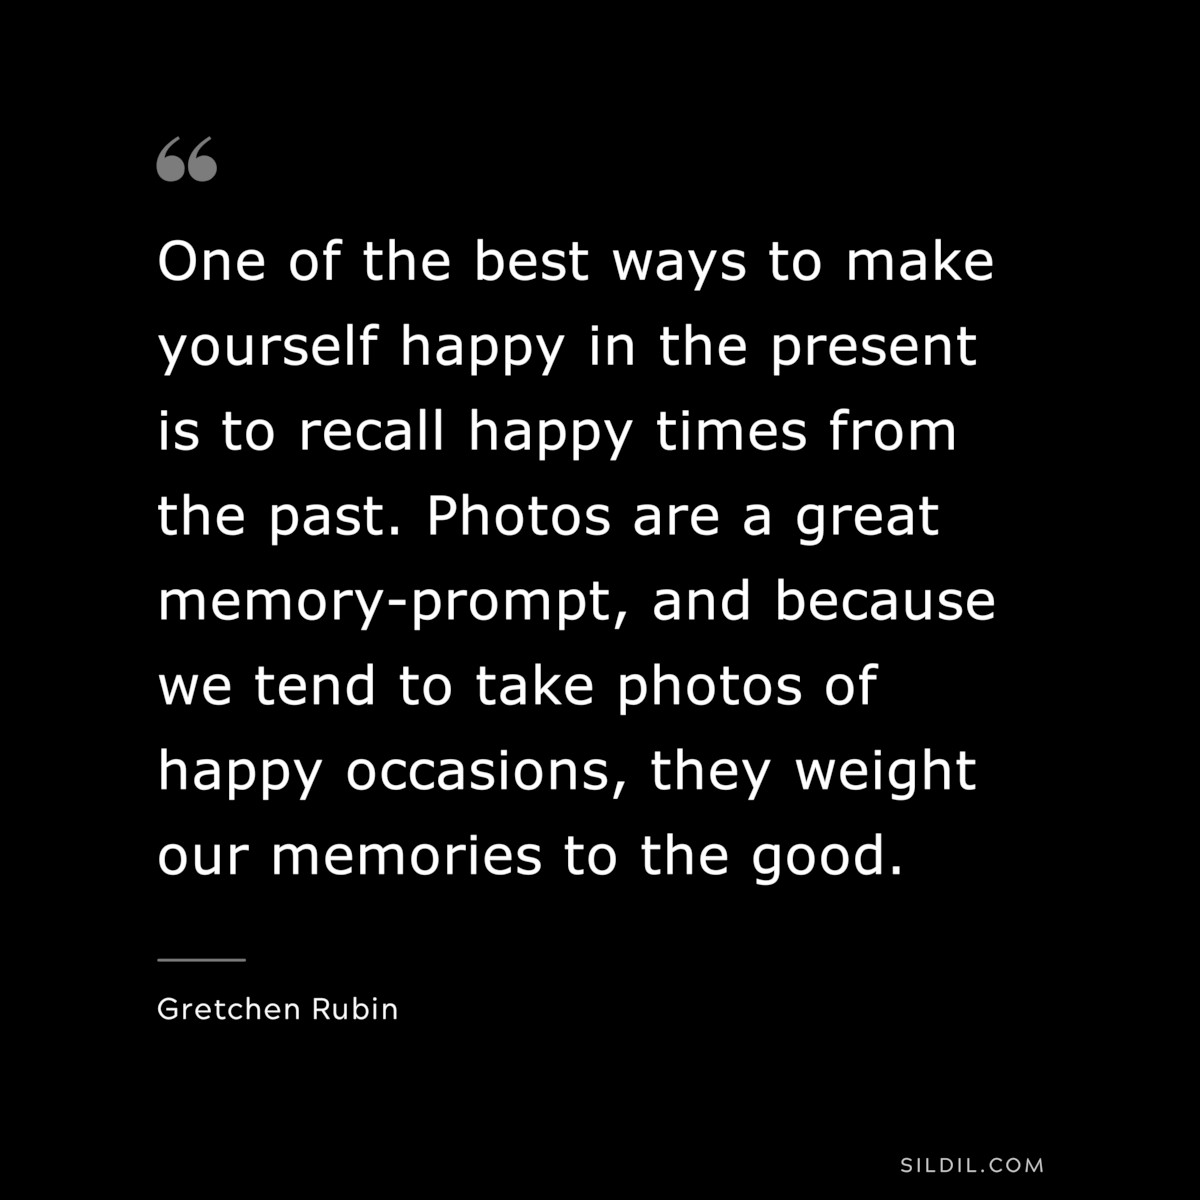 One of the best ways to make yourself happy in the present is to recall happy times from the past. Photos are a great memory-prompt, and because we tend to take photos of happy occasions, they weight our memories to the good. ― Gretchen Rubin